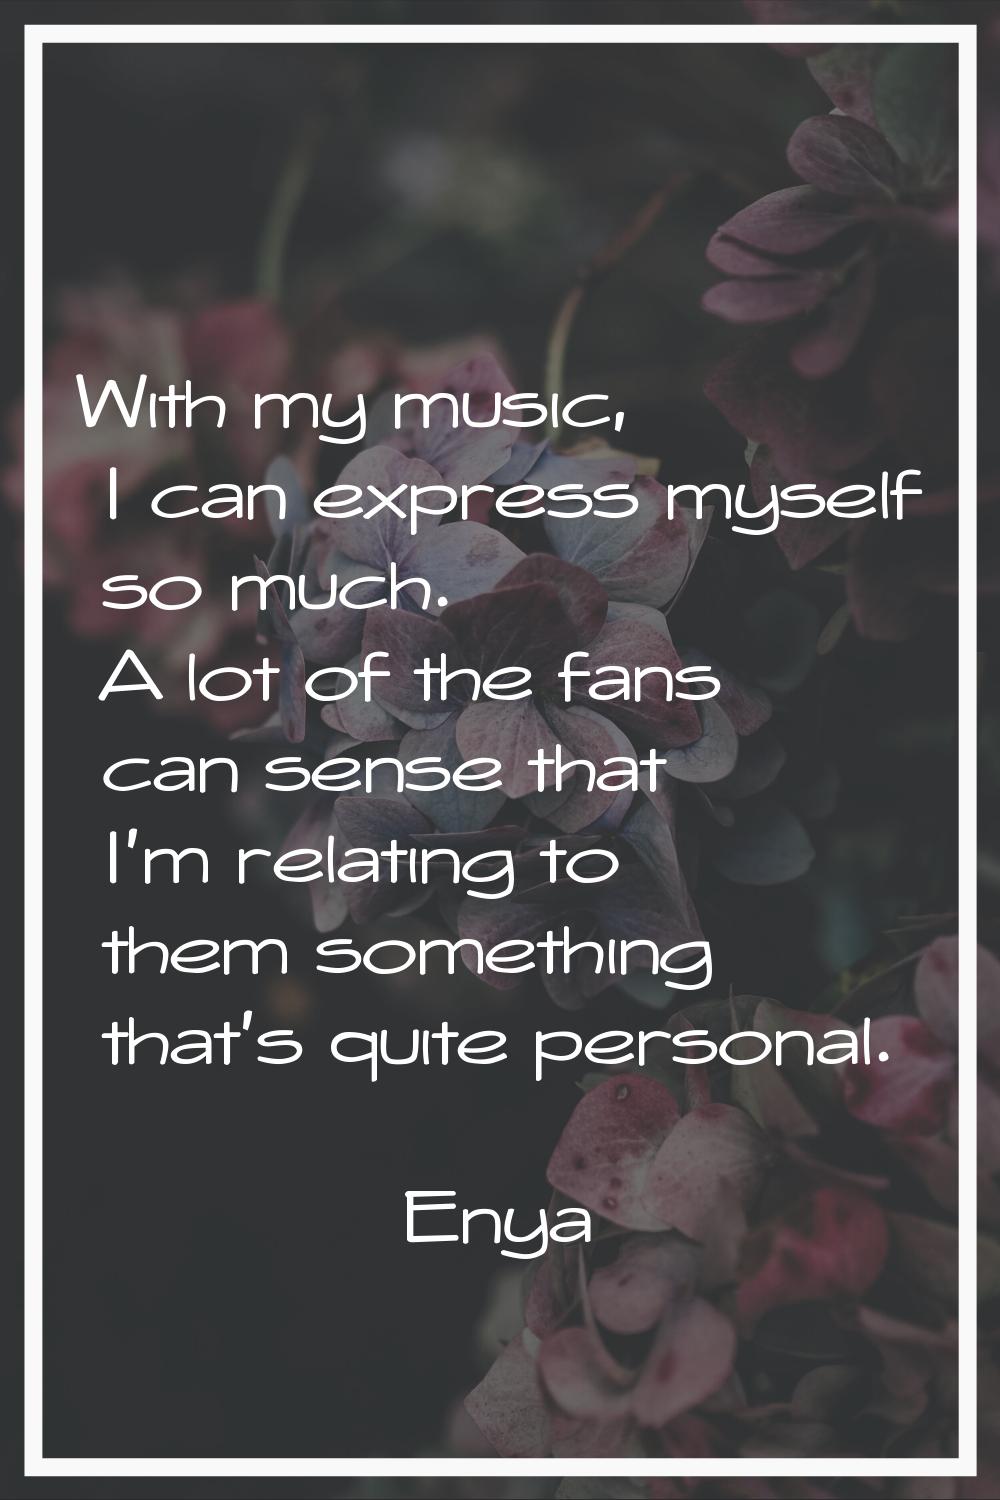 With my music, I can express myself so much. A lot of the fans can sense that I'm relating to them 